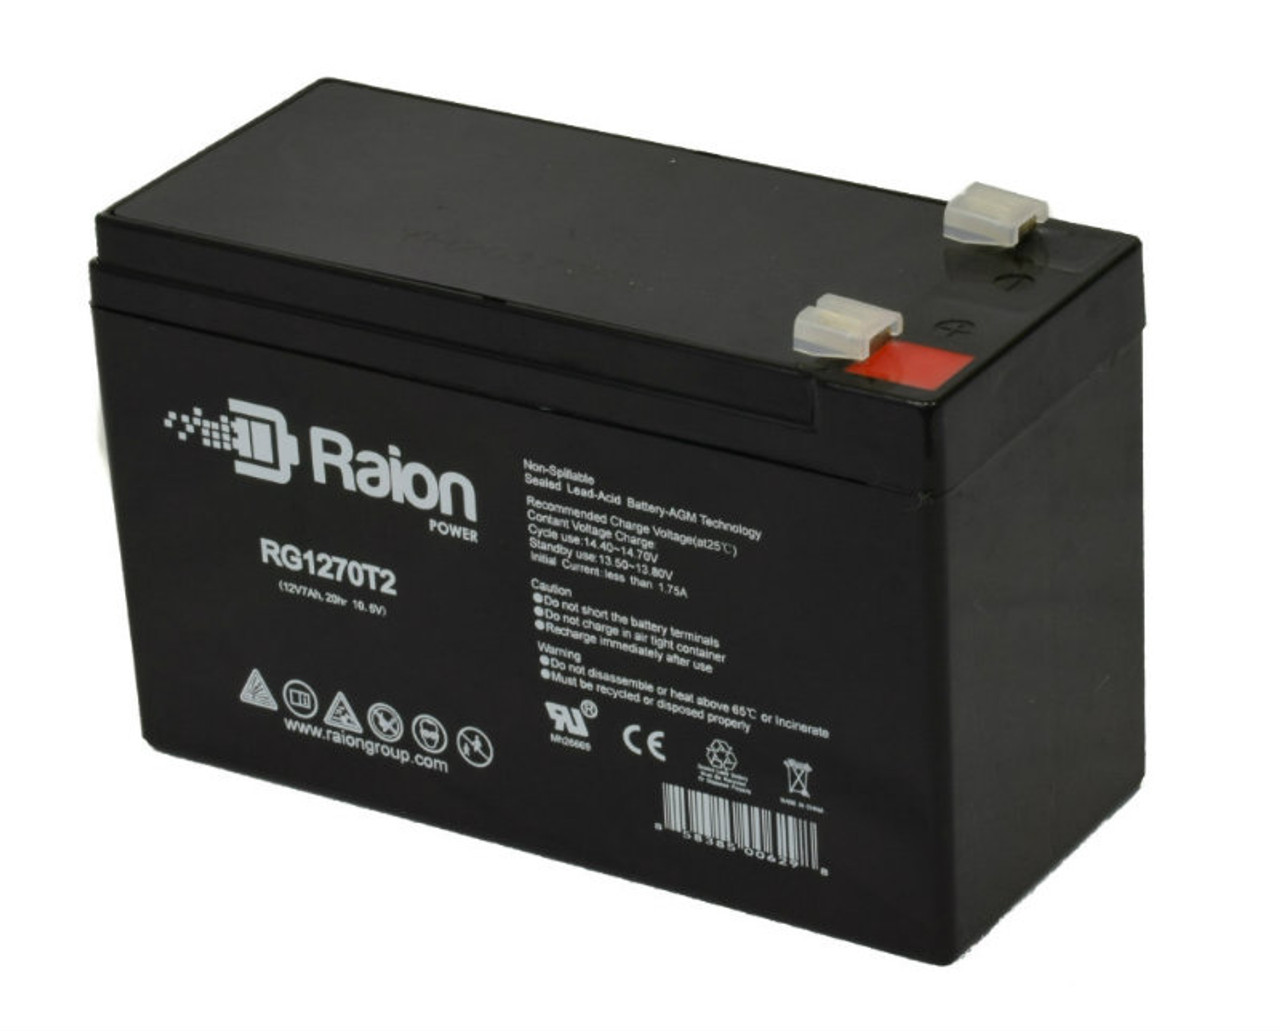 Raion Power RG1270T1 12V 7Ah Non-Spillable Replacement Battery for Vision CP1270L